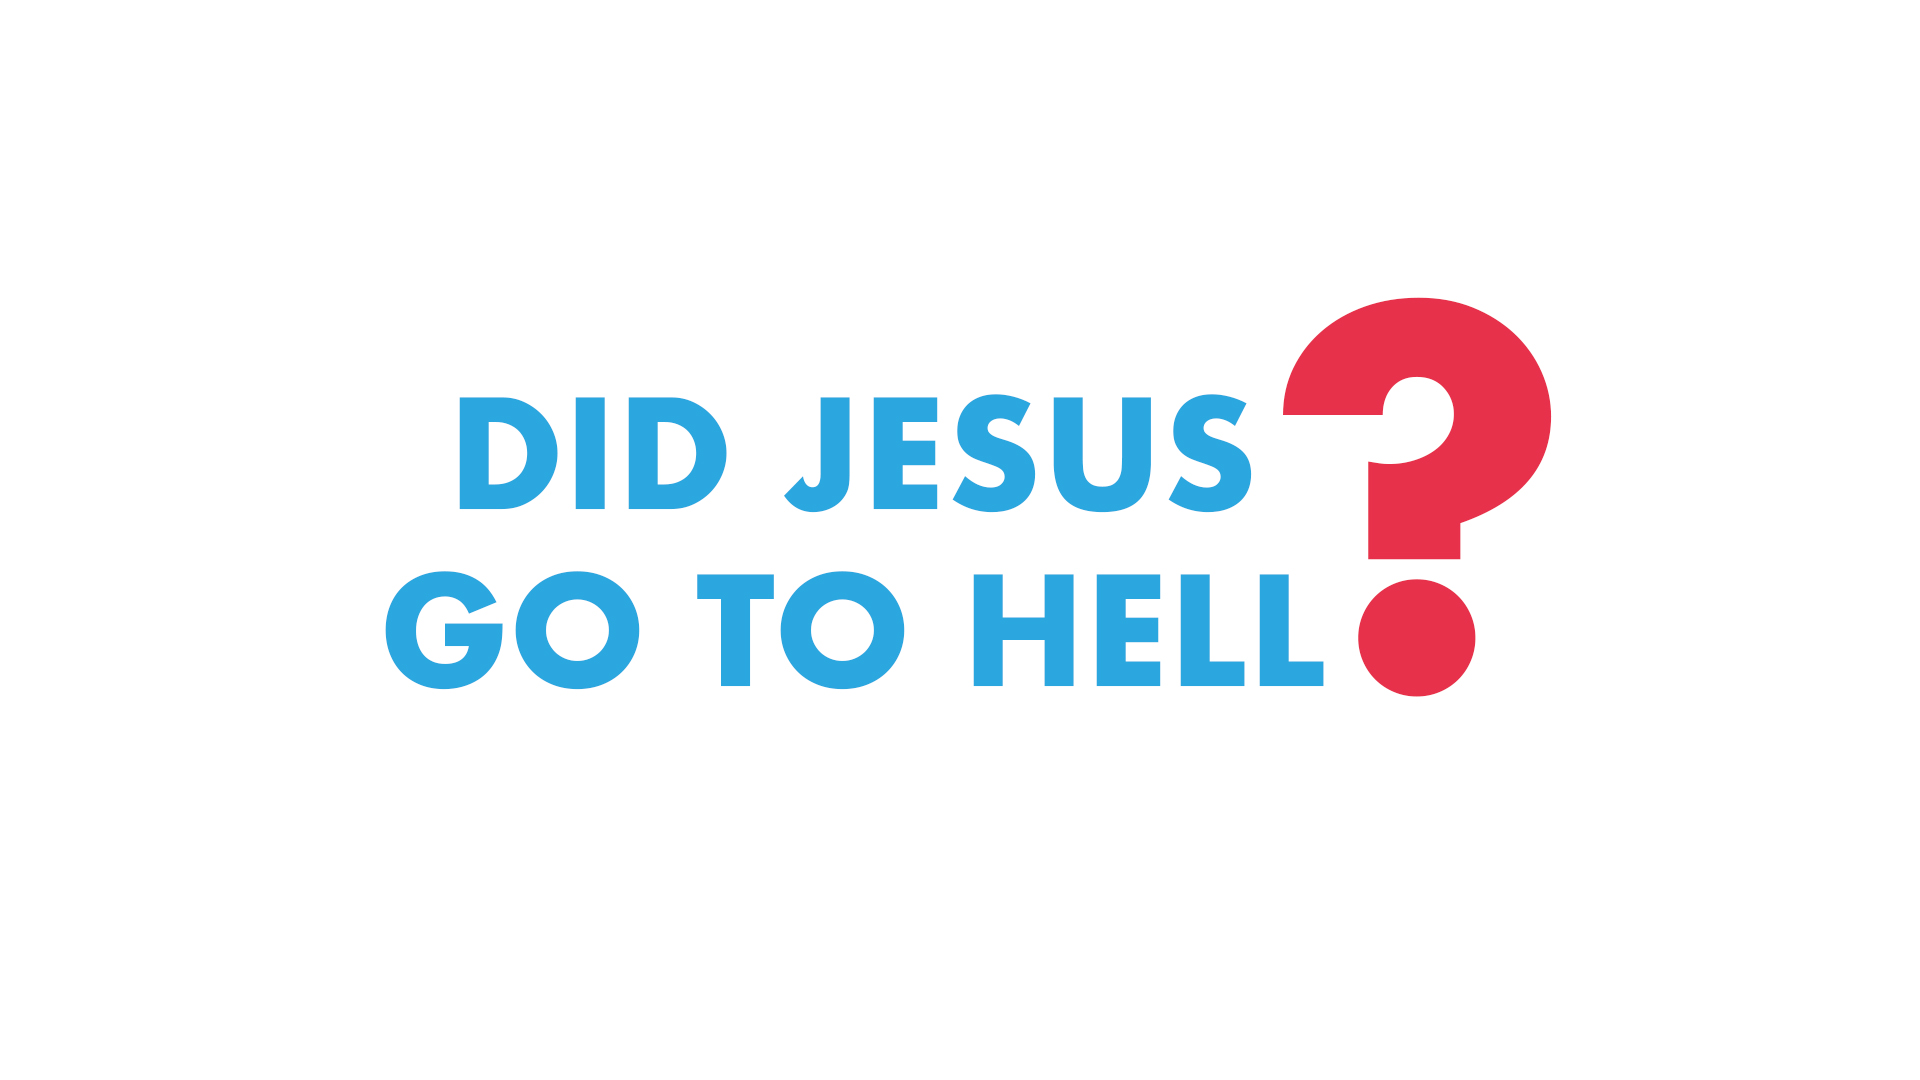 Did Jesus Go to Hell?